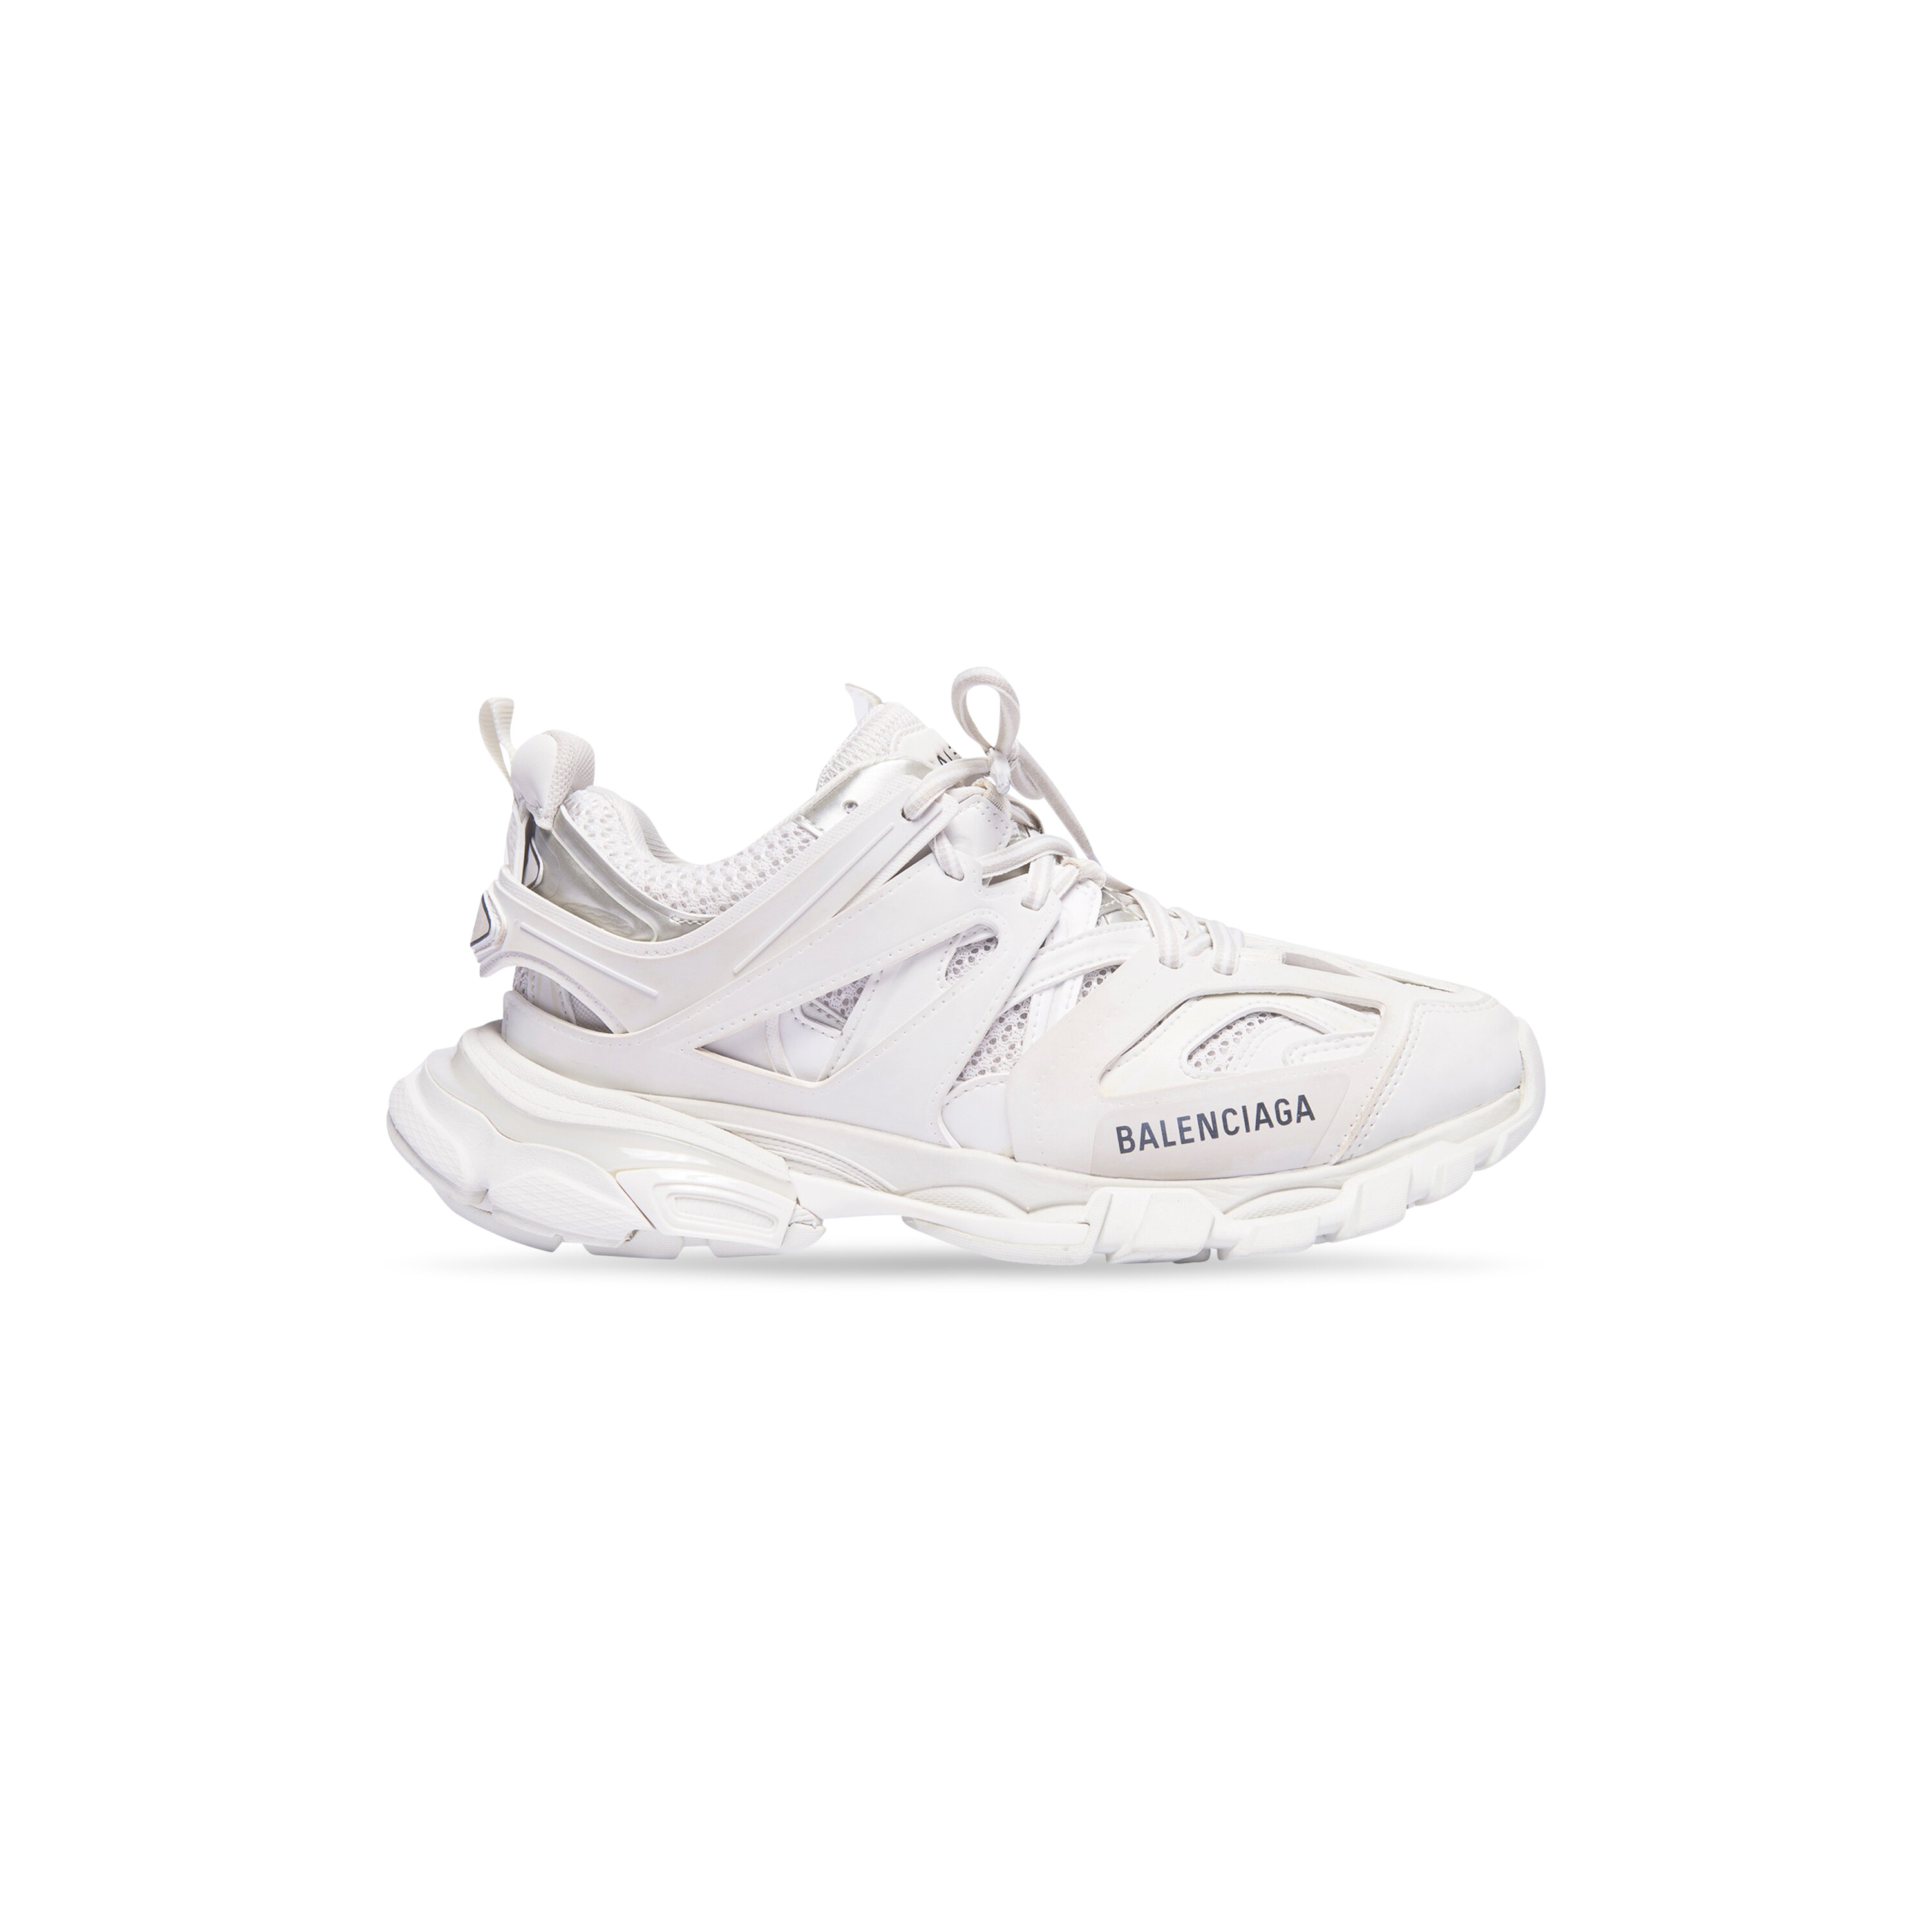 BALENCIAGA  Triple S Leather Trainers  Women  Chunky Trainers  Flannels